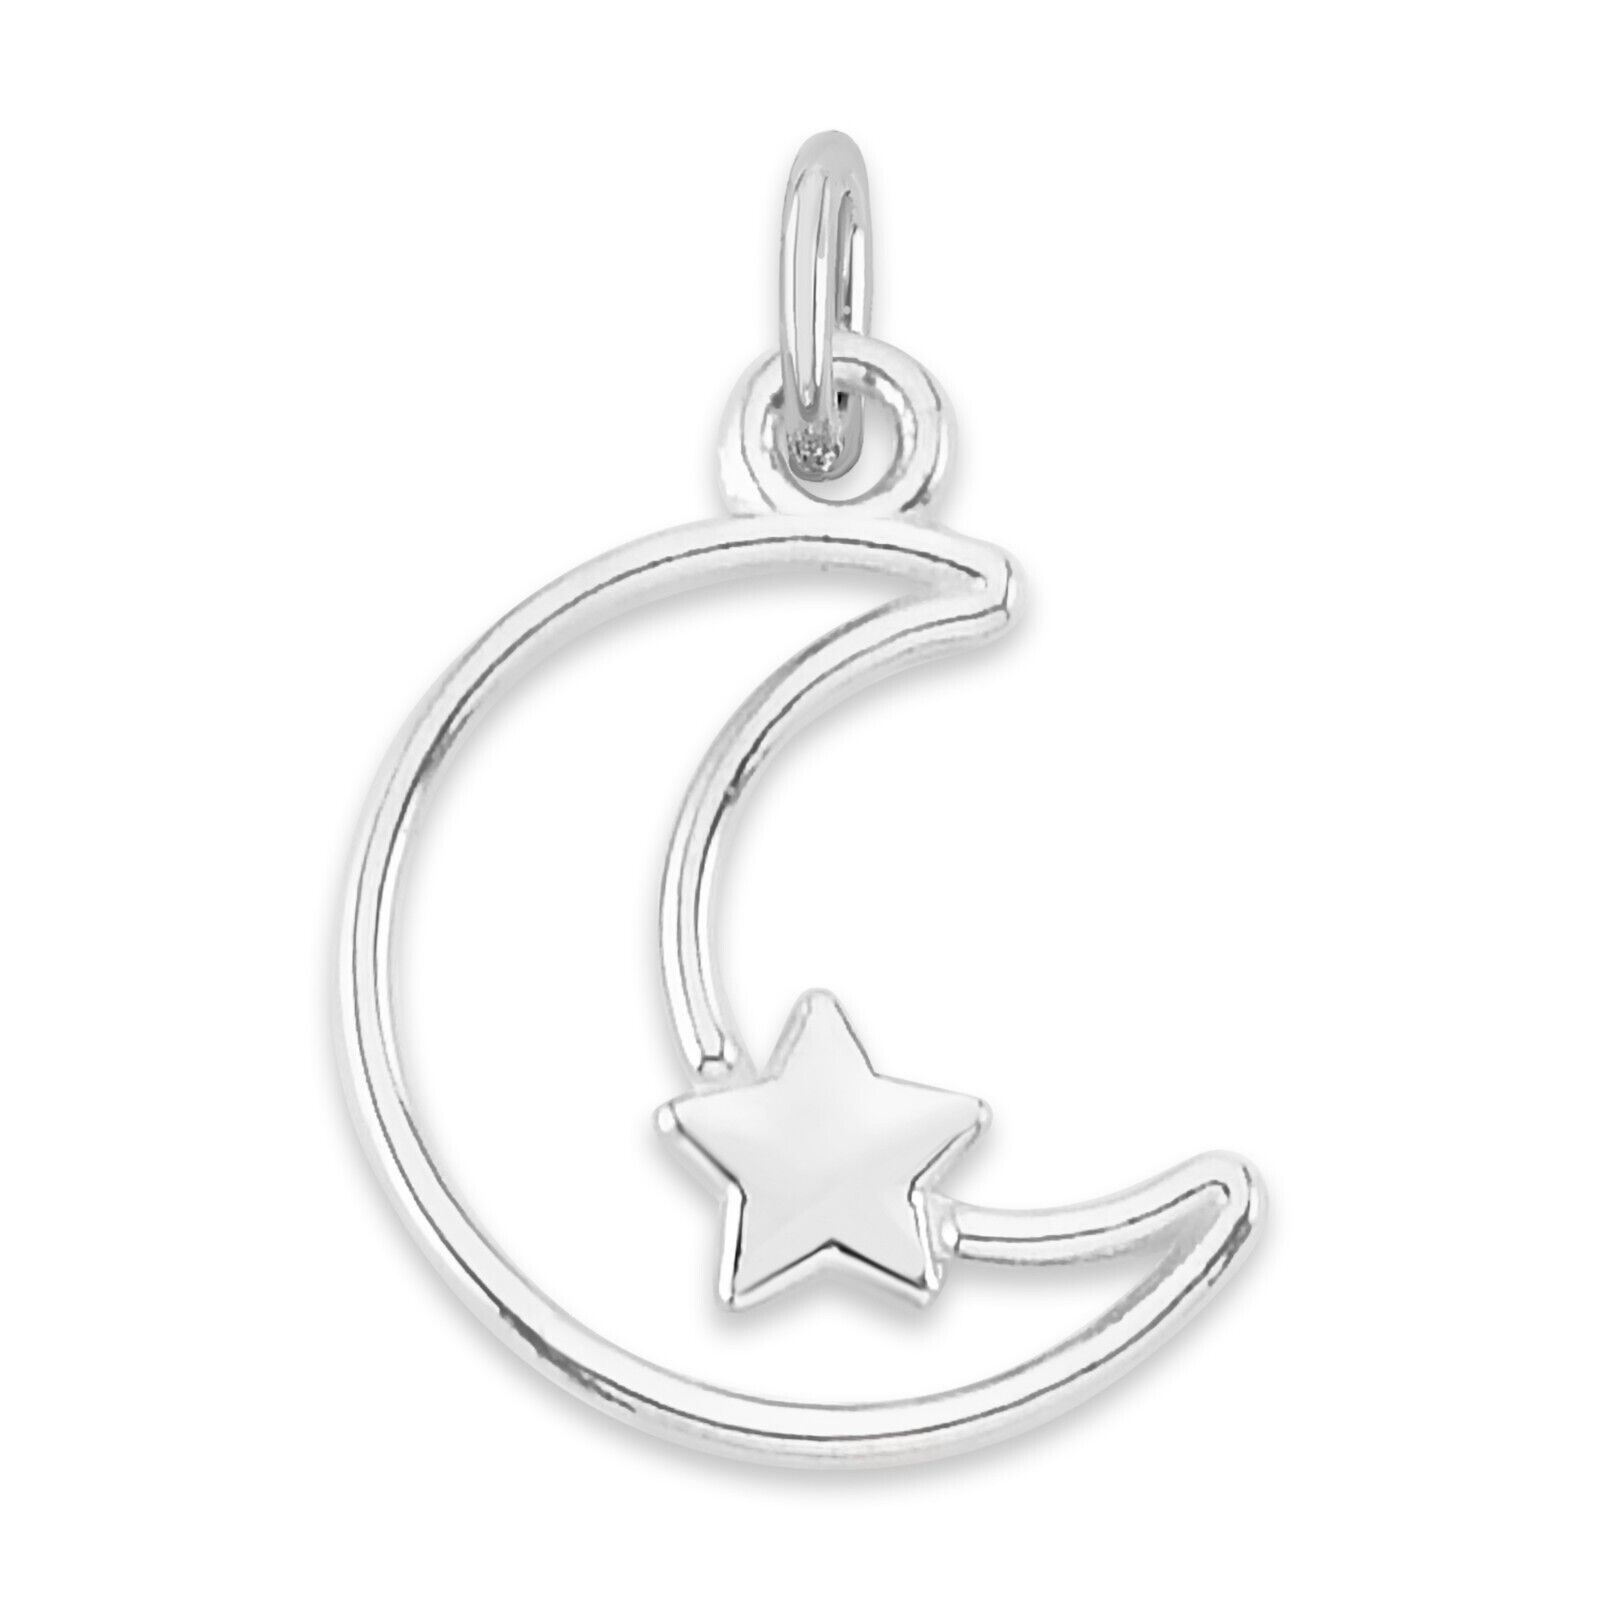 925 Sterling Silver Moon and Star Charm, Celestial Charm to attach to Bracelet